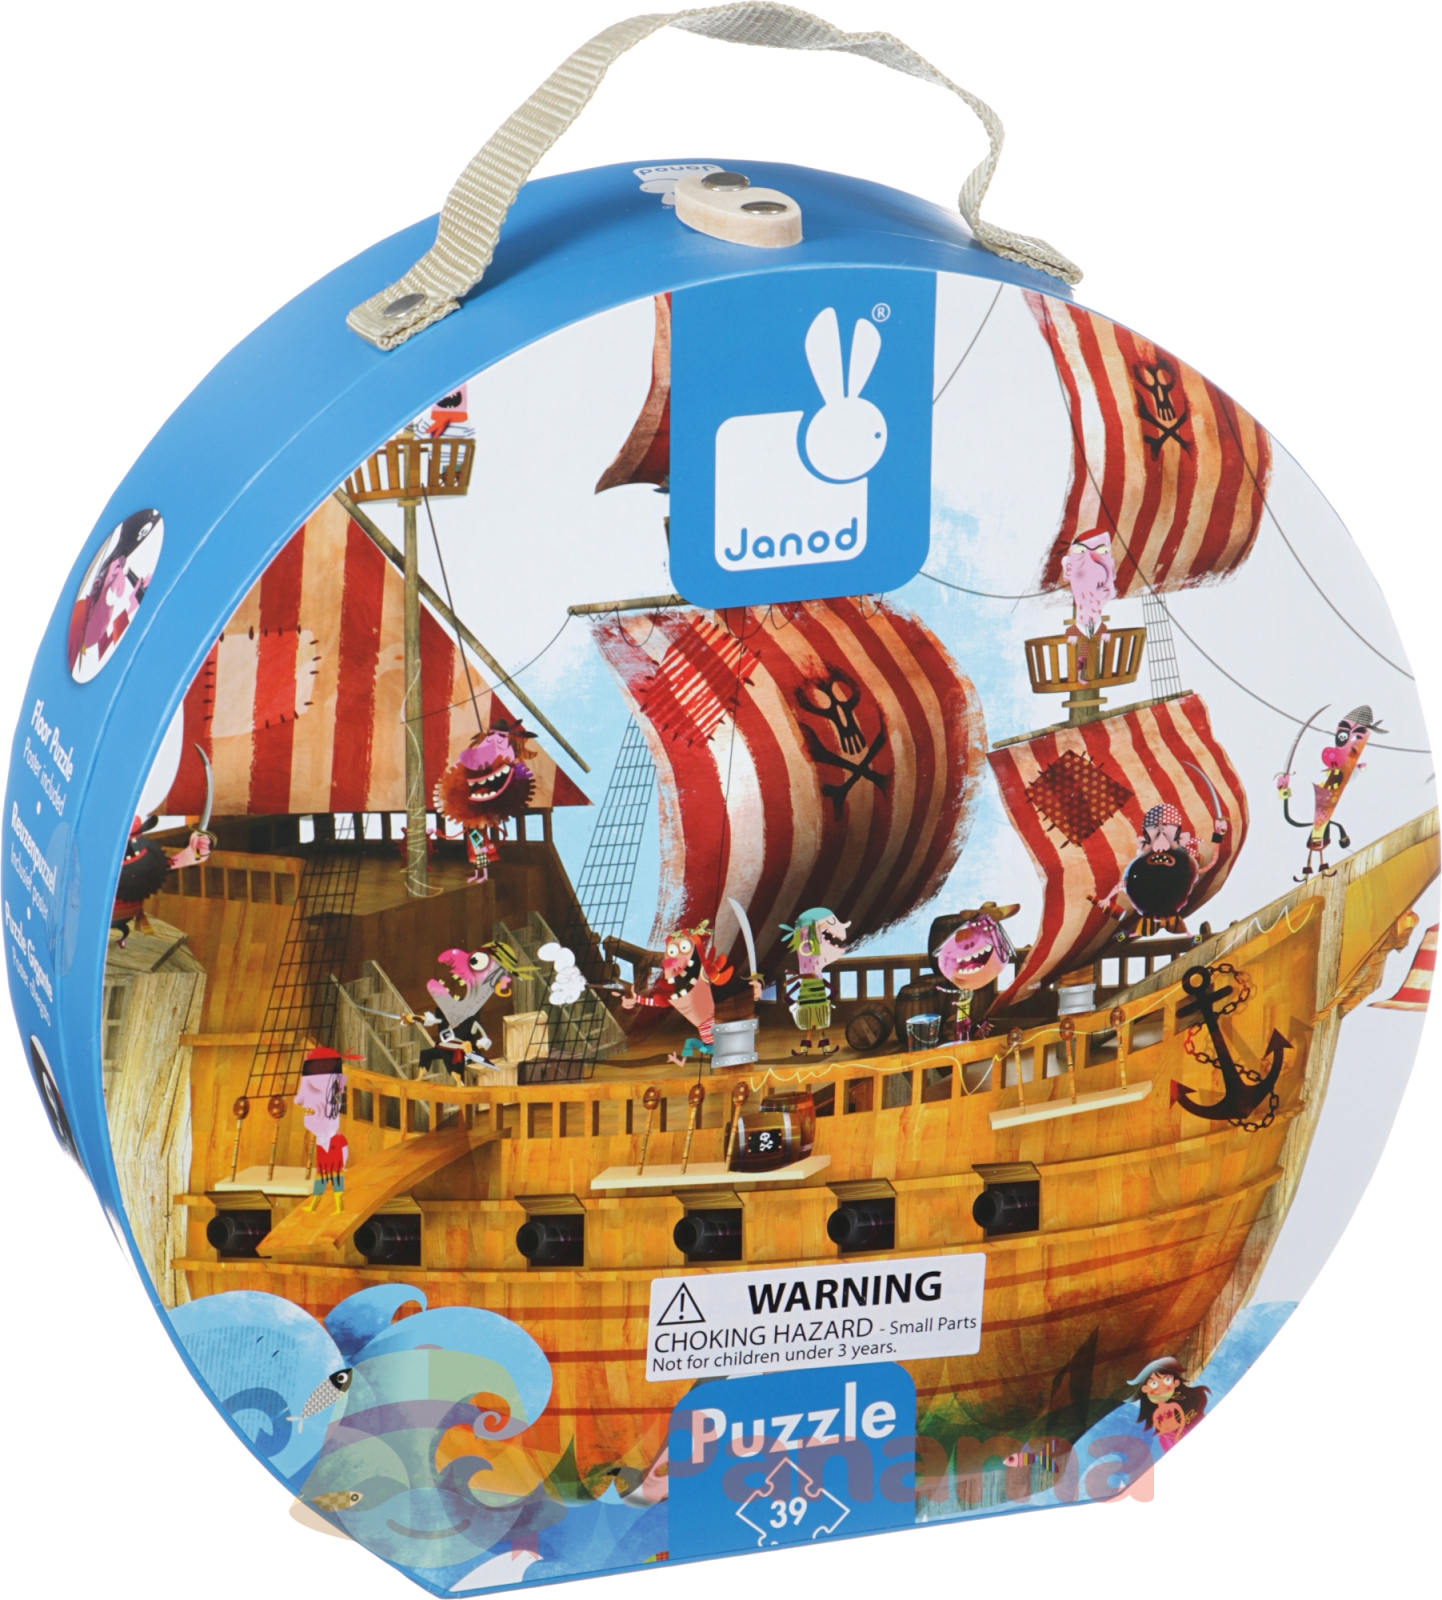 Giant Puzzle Pirate Ship 39pc